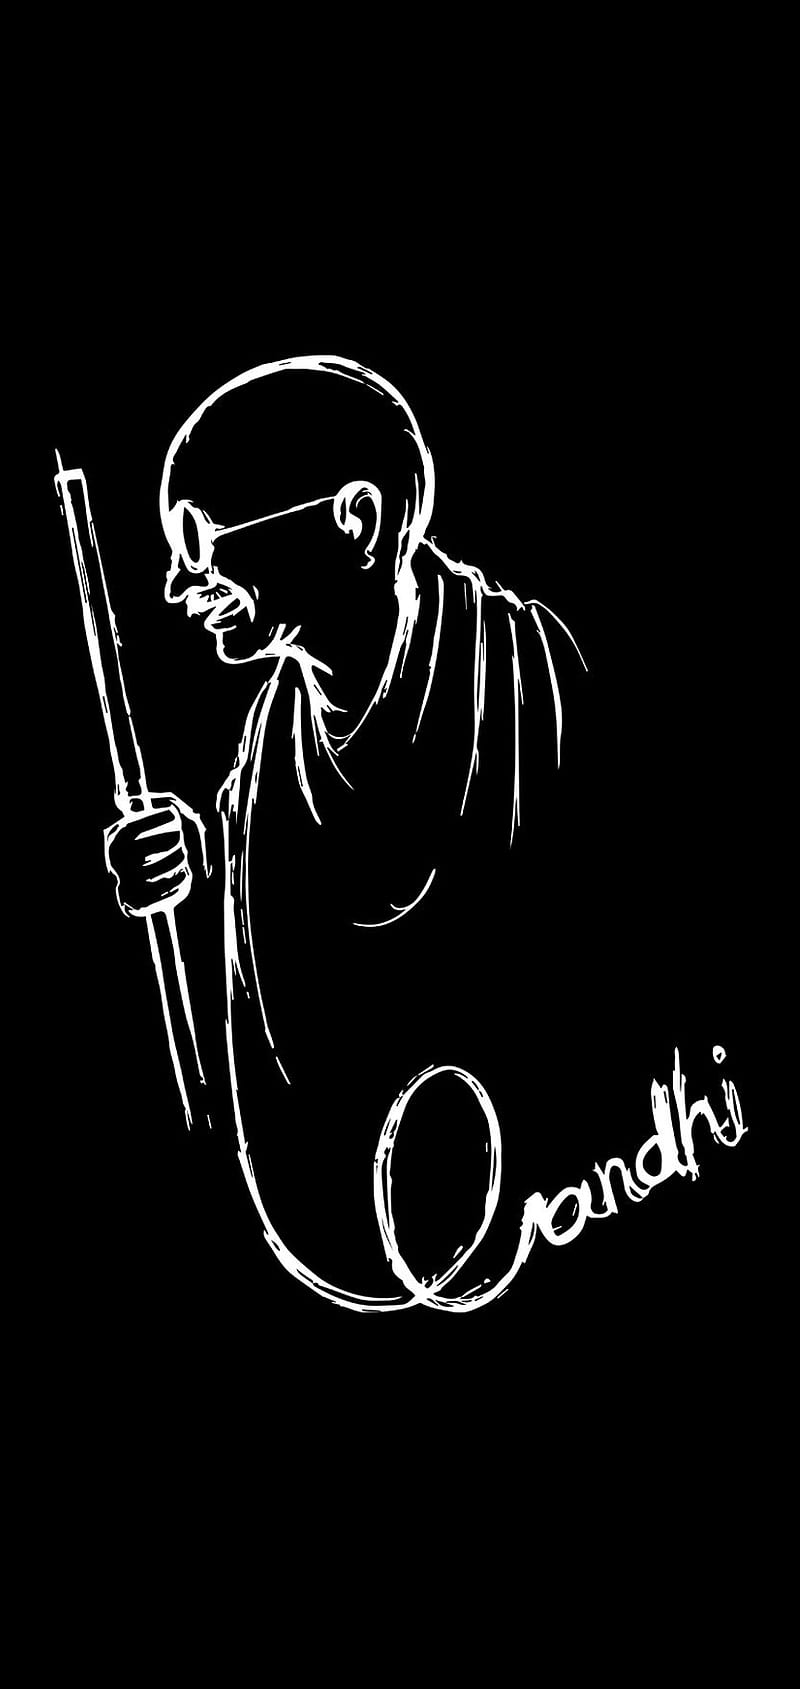 Happy Gandhi Jayanti 2023: Images, Wishes, Messages, Quotes, Pictures and  Greeting Cards | The Times of India